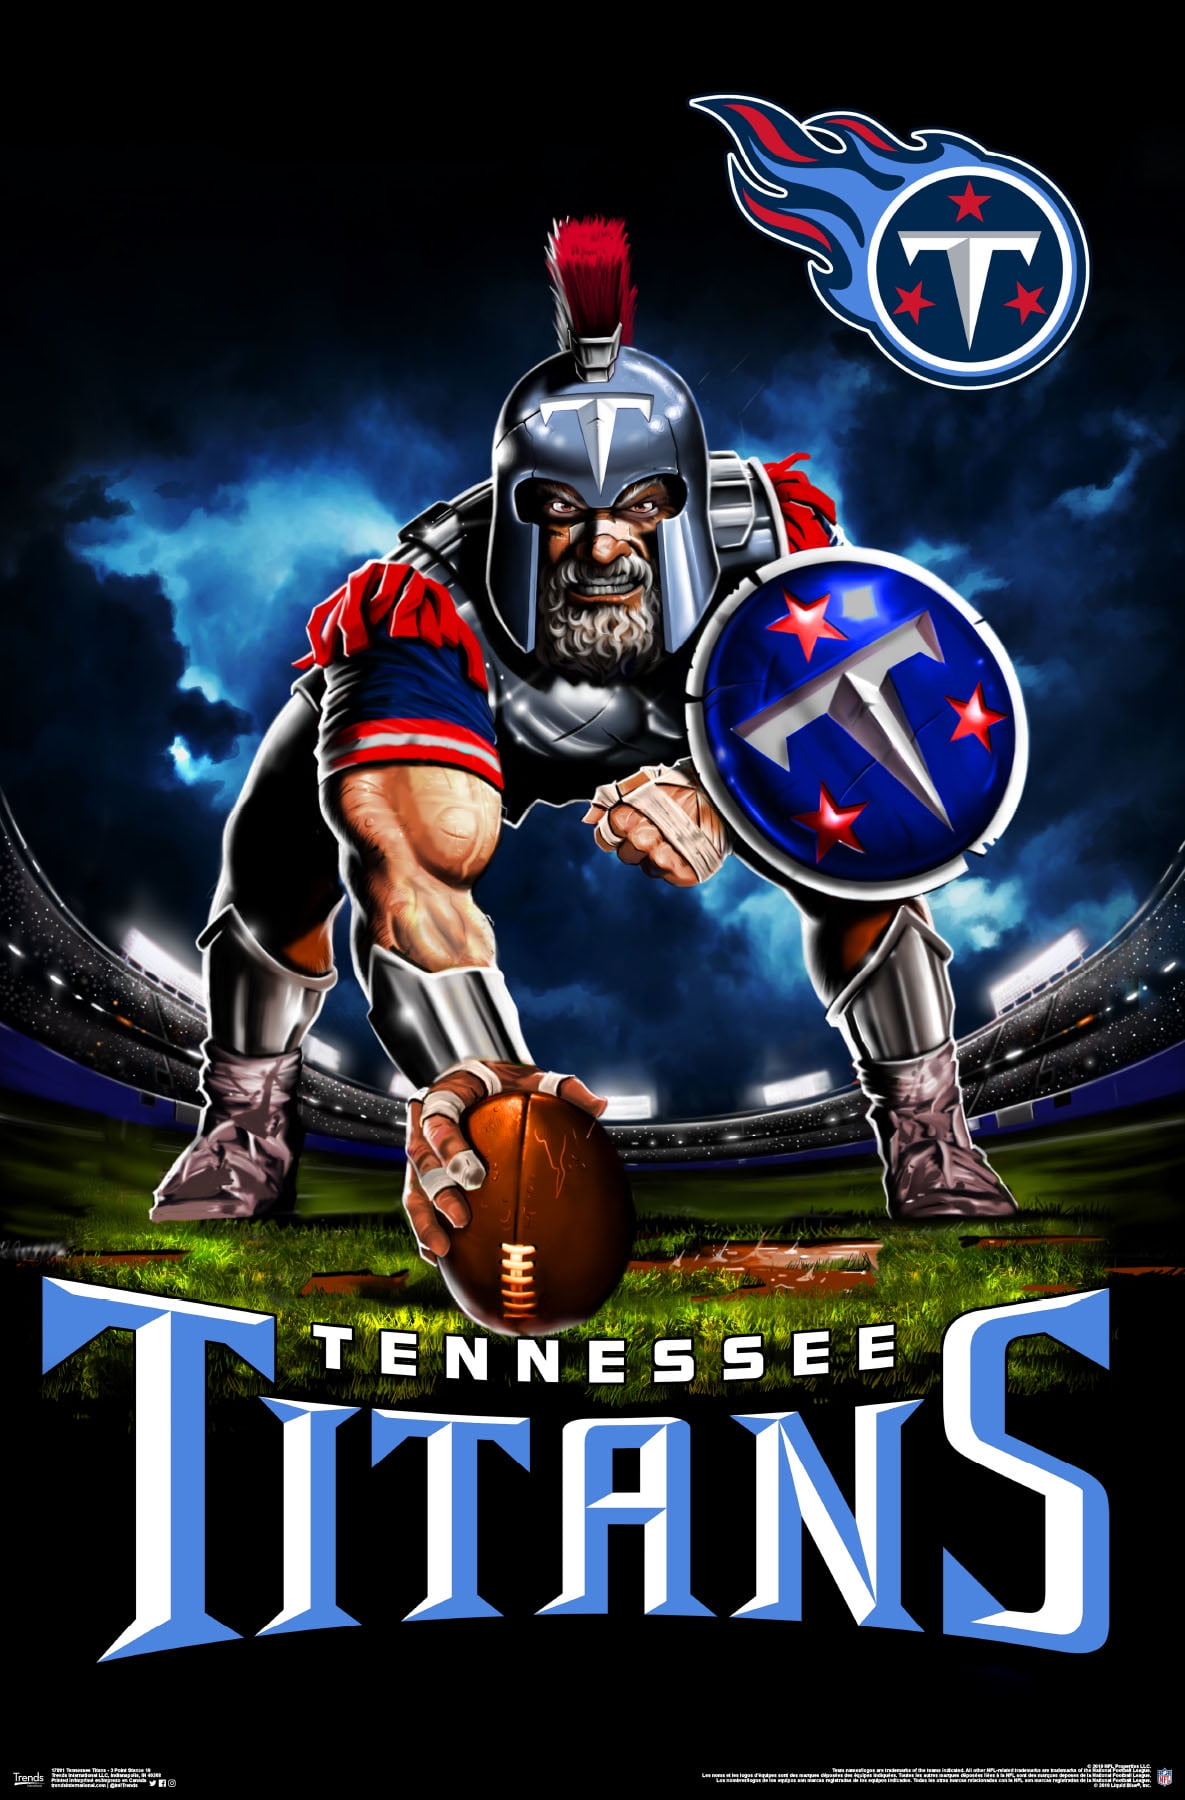 NFL Tennessee Titans - 3 Point Stance 19 Wall Poster, 22.375' x 34', Framed  